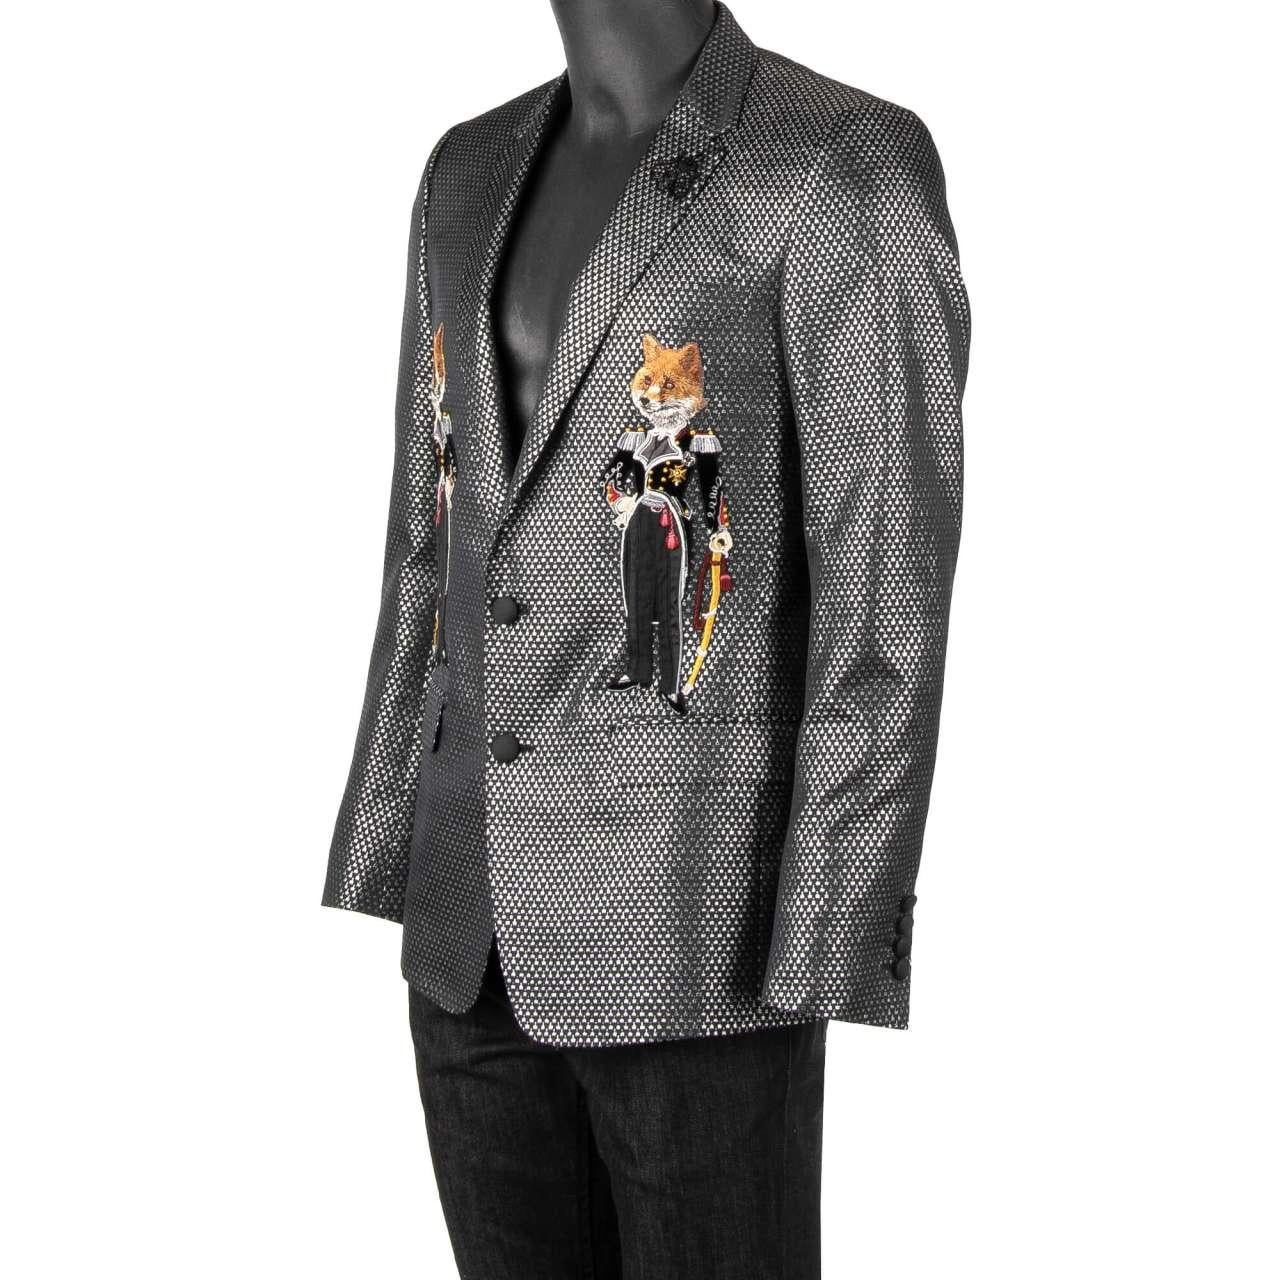 D&G Lurex Tuxedo Blazer MARTINI with Foxes and Bee Embroidery Silver 44 For Sale 1